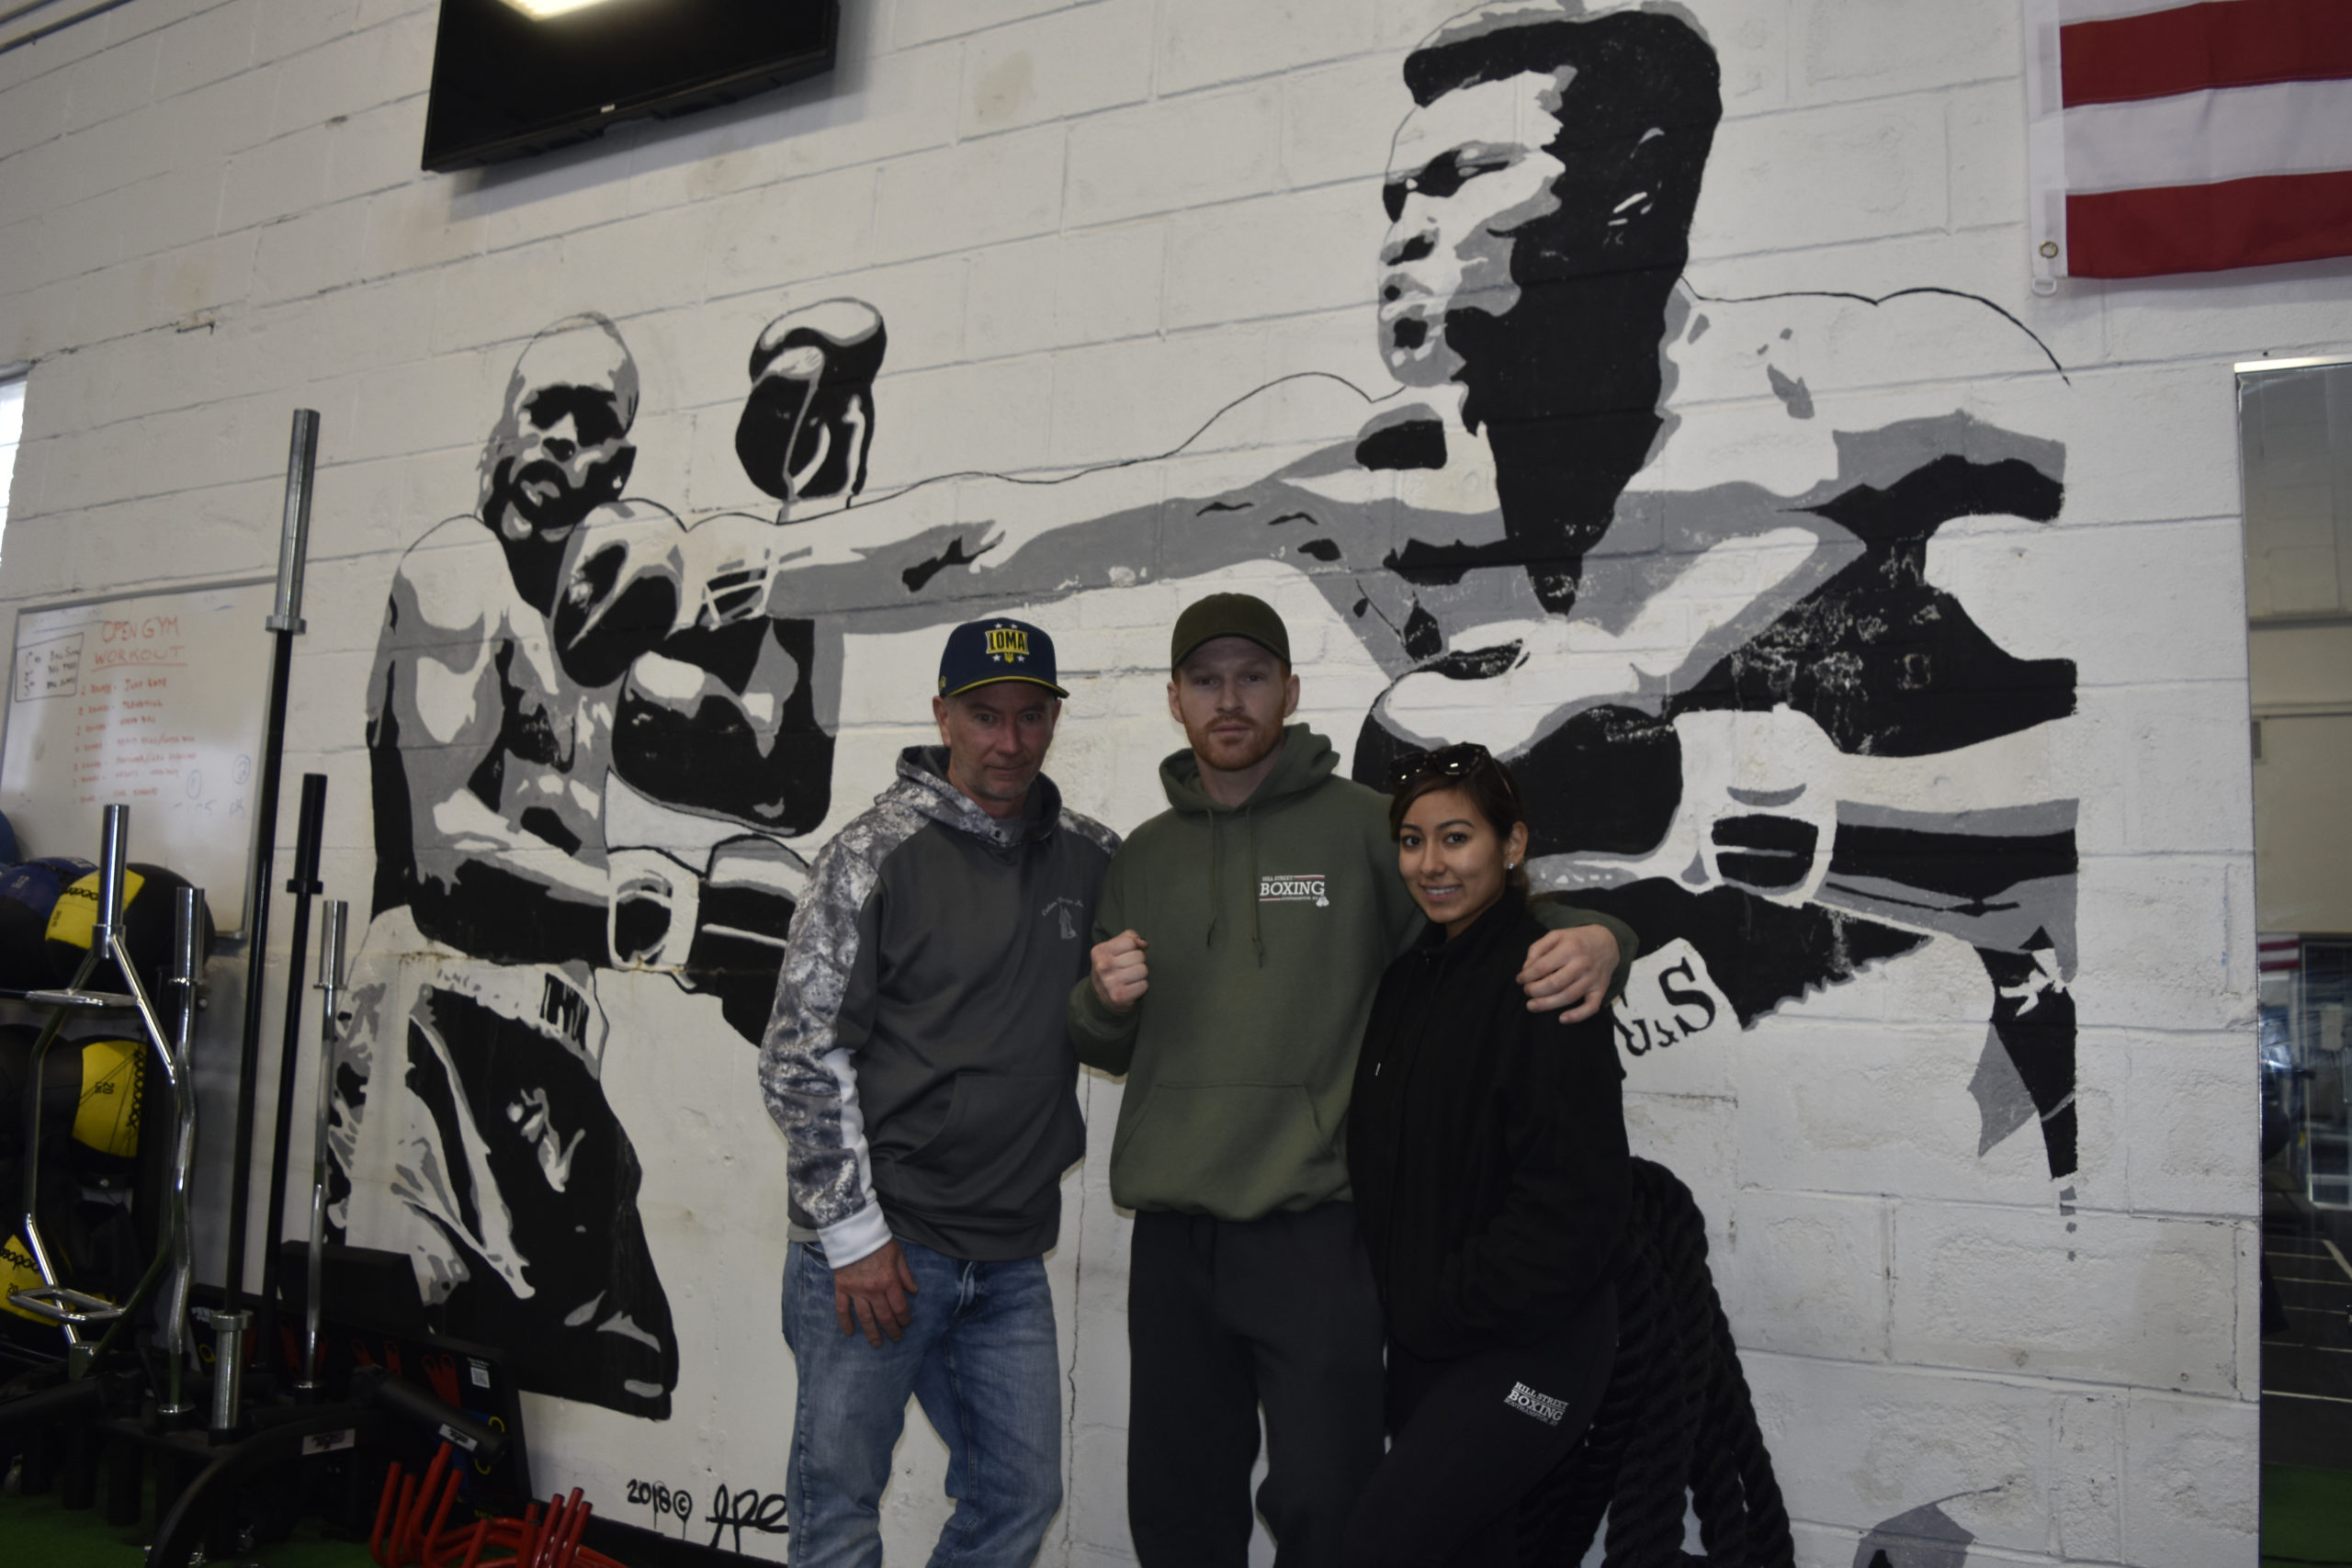 Boxing Is Booming  February 28 -- Hill Street Boxing has found success with its fitness model, said founders Thomas Haynia and Avery Crocker and manager Renata Munoz.